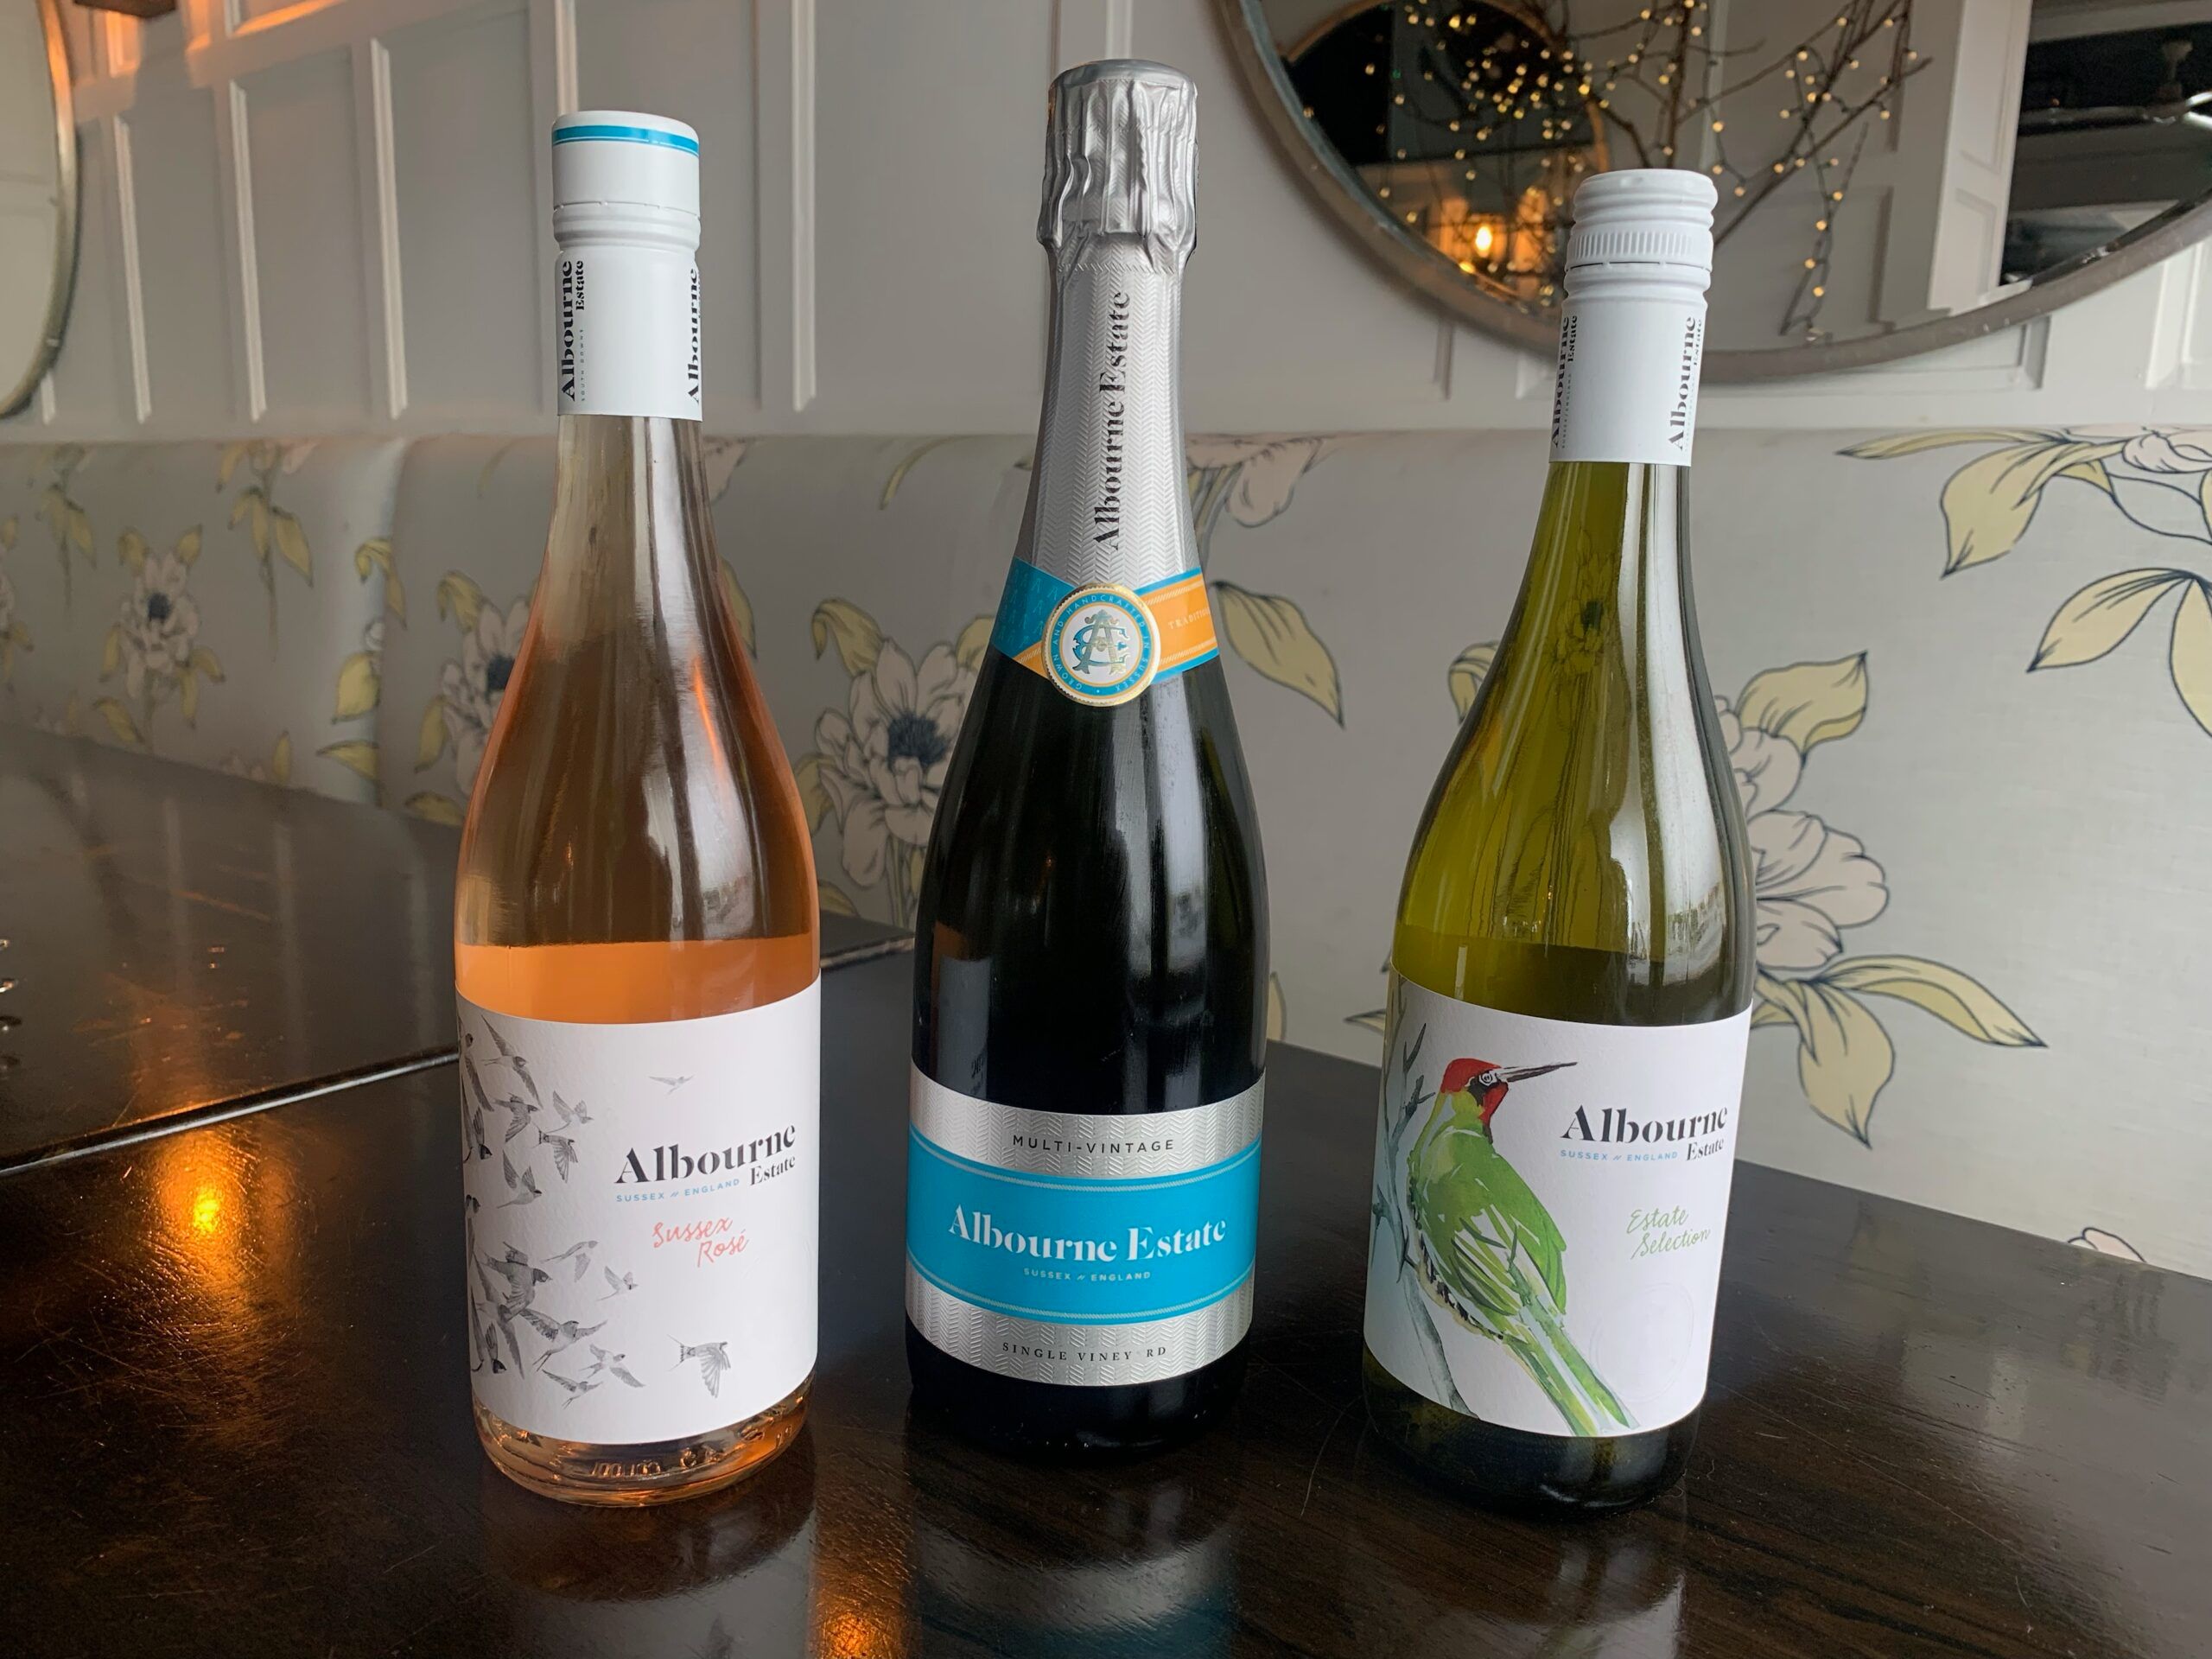 Three bottles of wine from the Albourne Estate in Sussex on a wooden table with floral patterned seating behind it. To the left is a bottle of rosé, centre is a bottle of sparkling with silver and blue foil and label, to the right is a green glass bottle of whinte wine with a red woodpecker on the label.